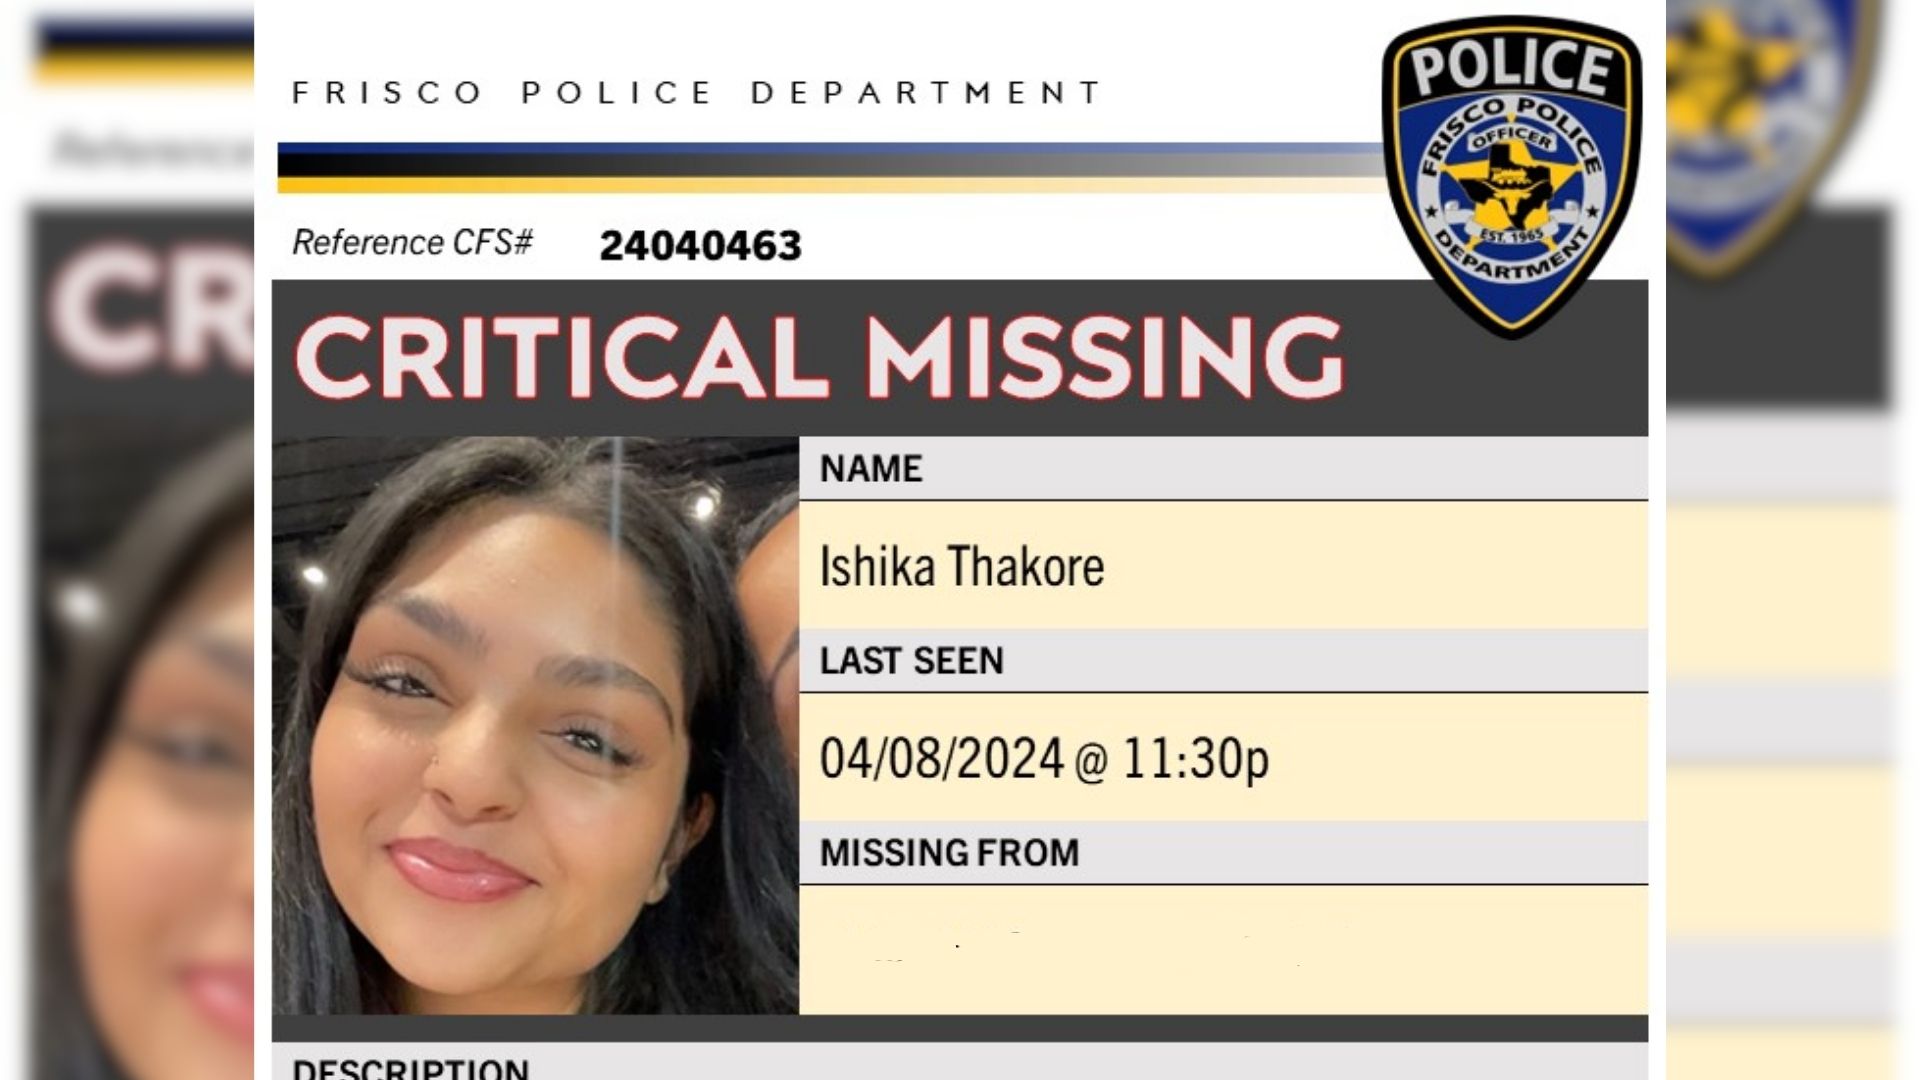 Indian-American teen Ishika Thakore found safe after Frisco Police issue critical missing alert